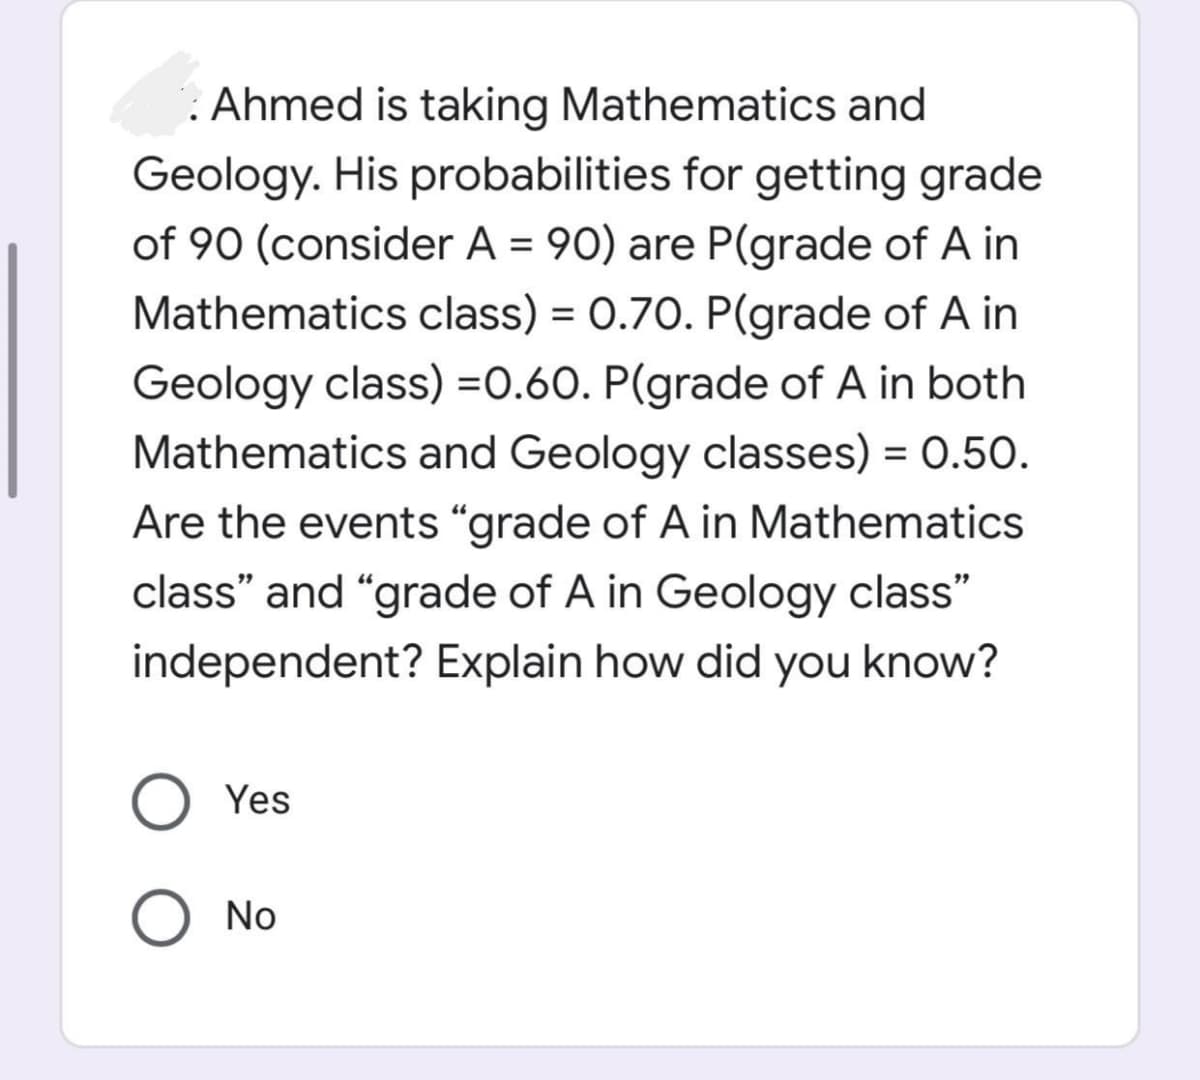 : Ahmed is taking Mathematics and
Geology. His probabilities for getting grade
of 90 (consider A = 90) are P(grade of A in
Mathematics class) = 0.70. P(grade of A in
%3D
Geology class) =0.60. P(grade of A in both
Mathematics and Geology classes) = 0.50.
%3D
Are the events “grade of A in Mathematics
class" and "grade of A in Geology class"
independent? Explain how did you know?
Yes
O No
